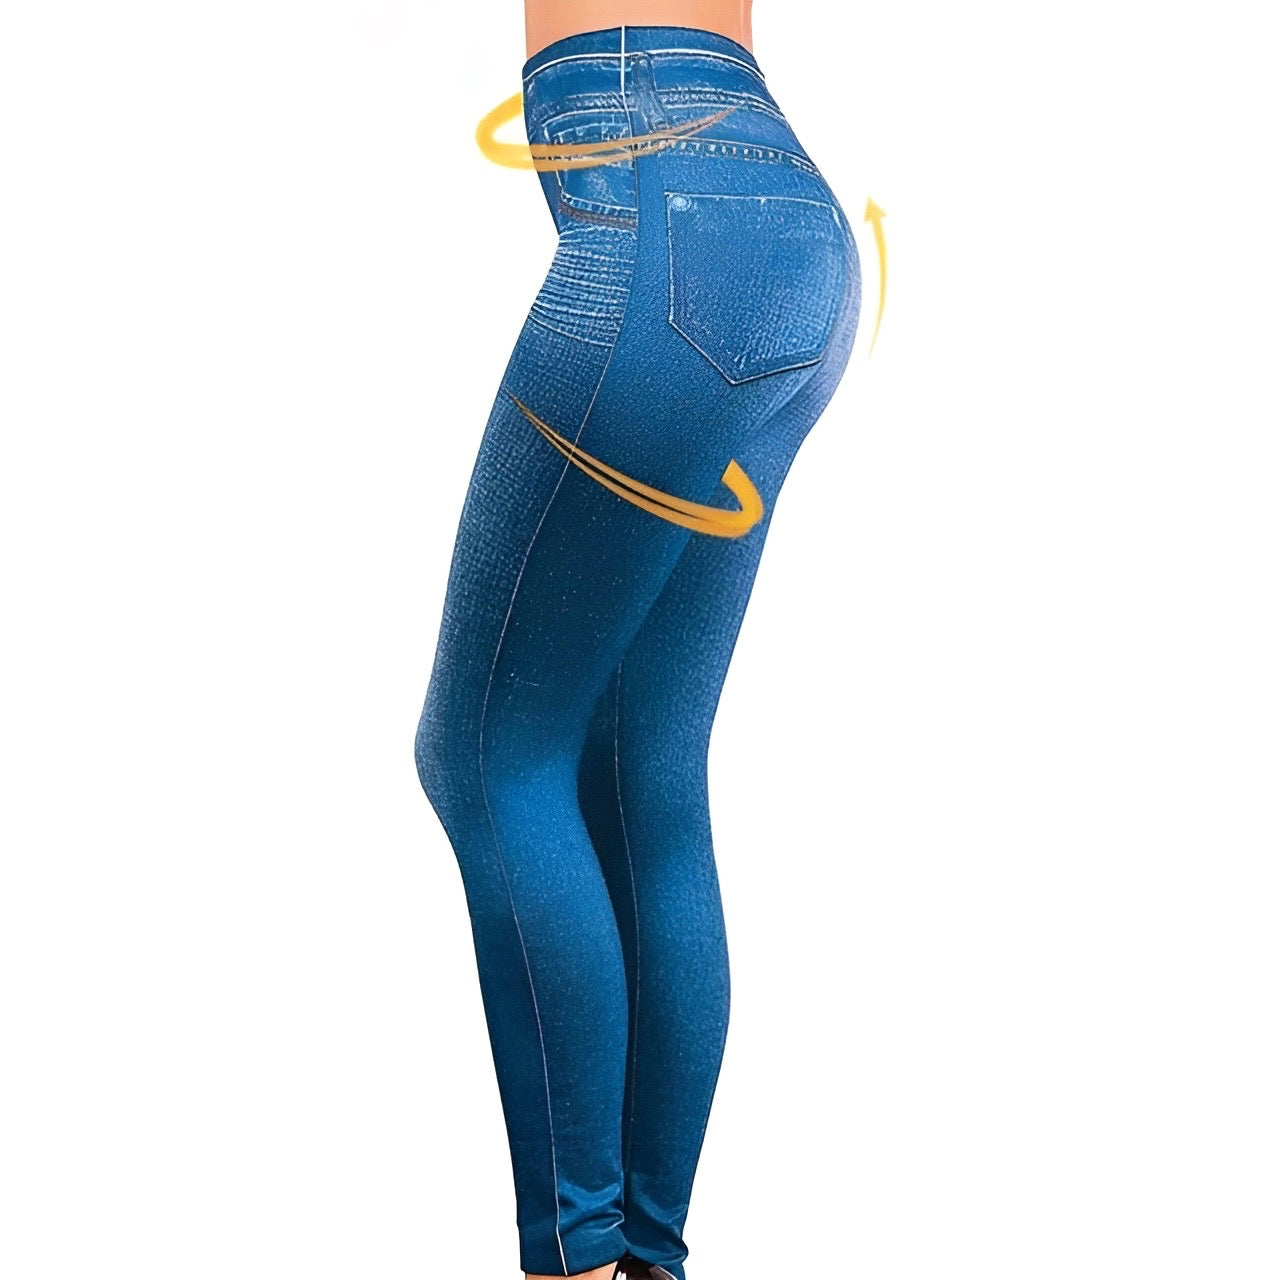 OCW Jeggings for Women Slim Stretch Tummy Control Butt Lifting Jean